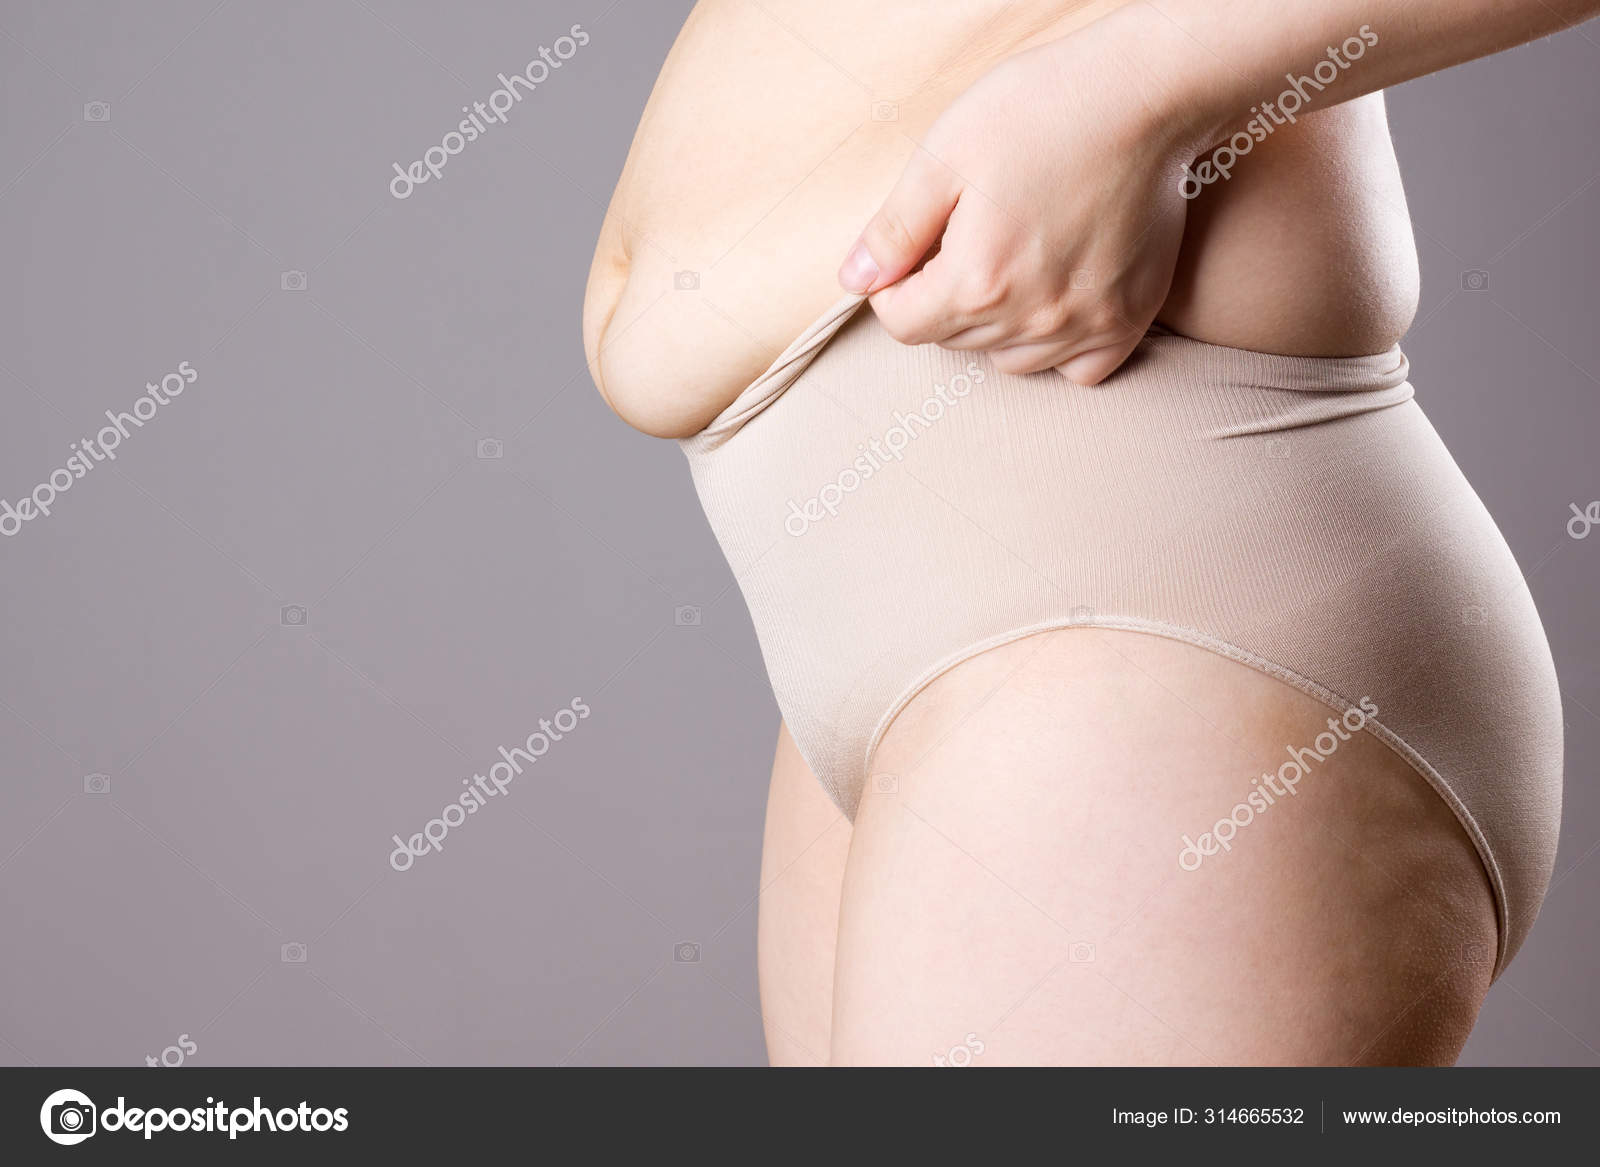 Fat woman in corrective panties, flabby belly after pregnancy